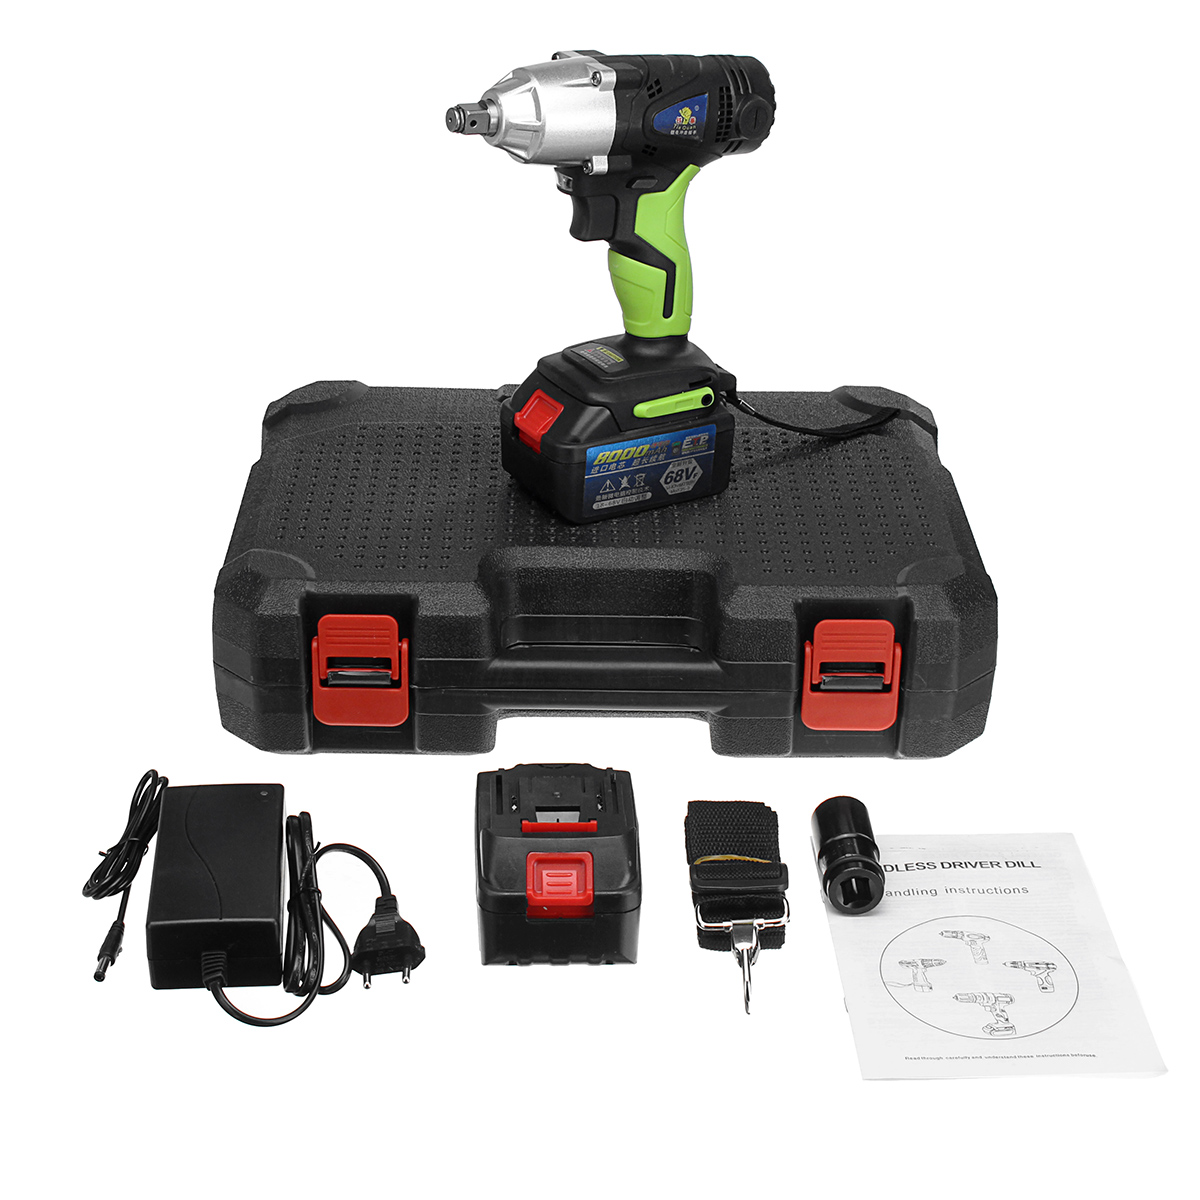 80Ah-68V-Cordless-Impact-Wrench-Li-ion-Power-Driver-Drill-Power-Wrench-Tools-1-Charger-2-Batteries-1286260-7